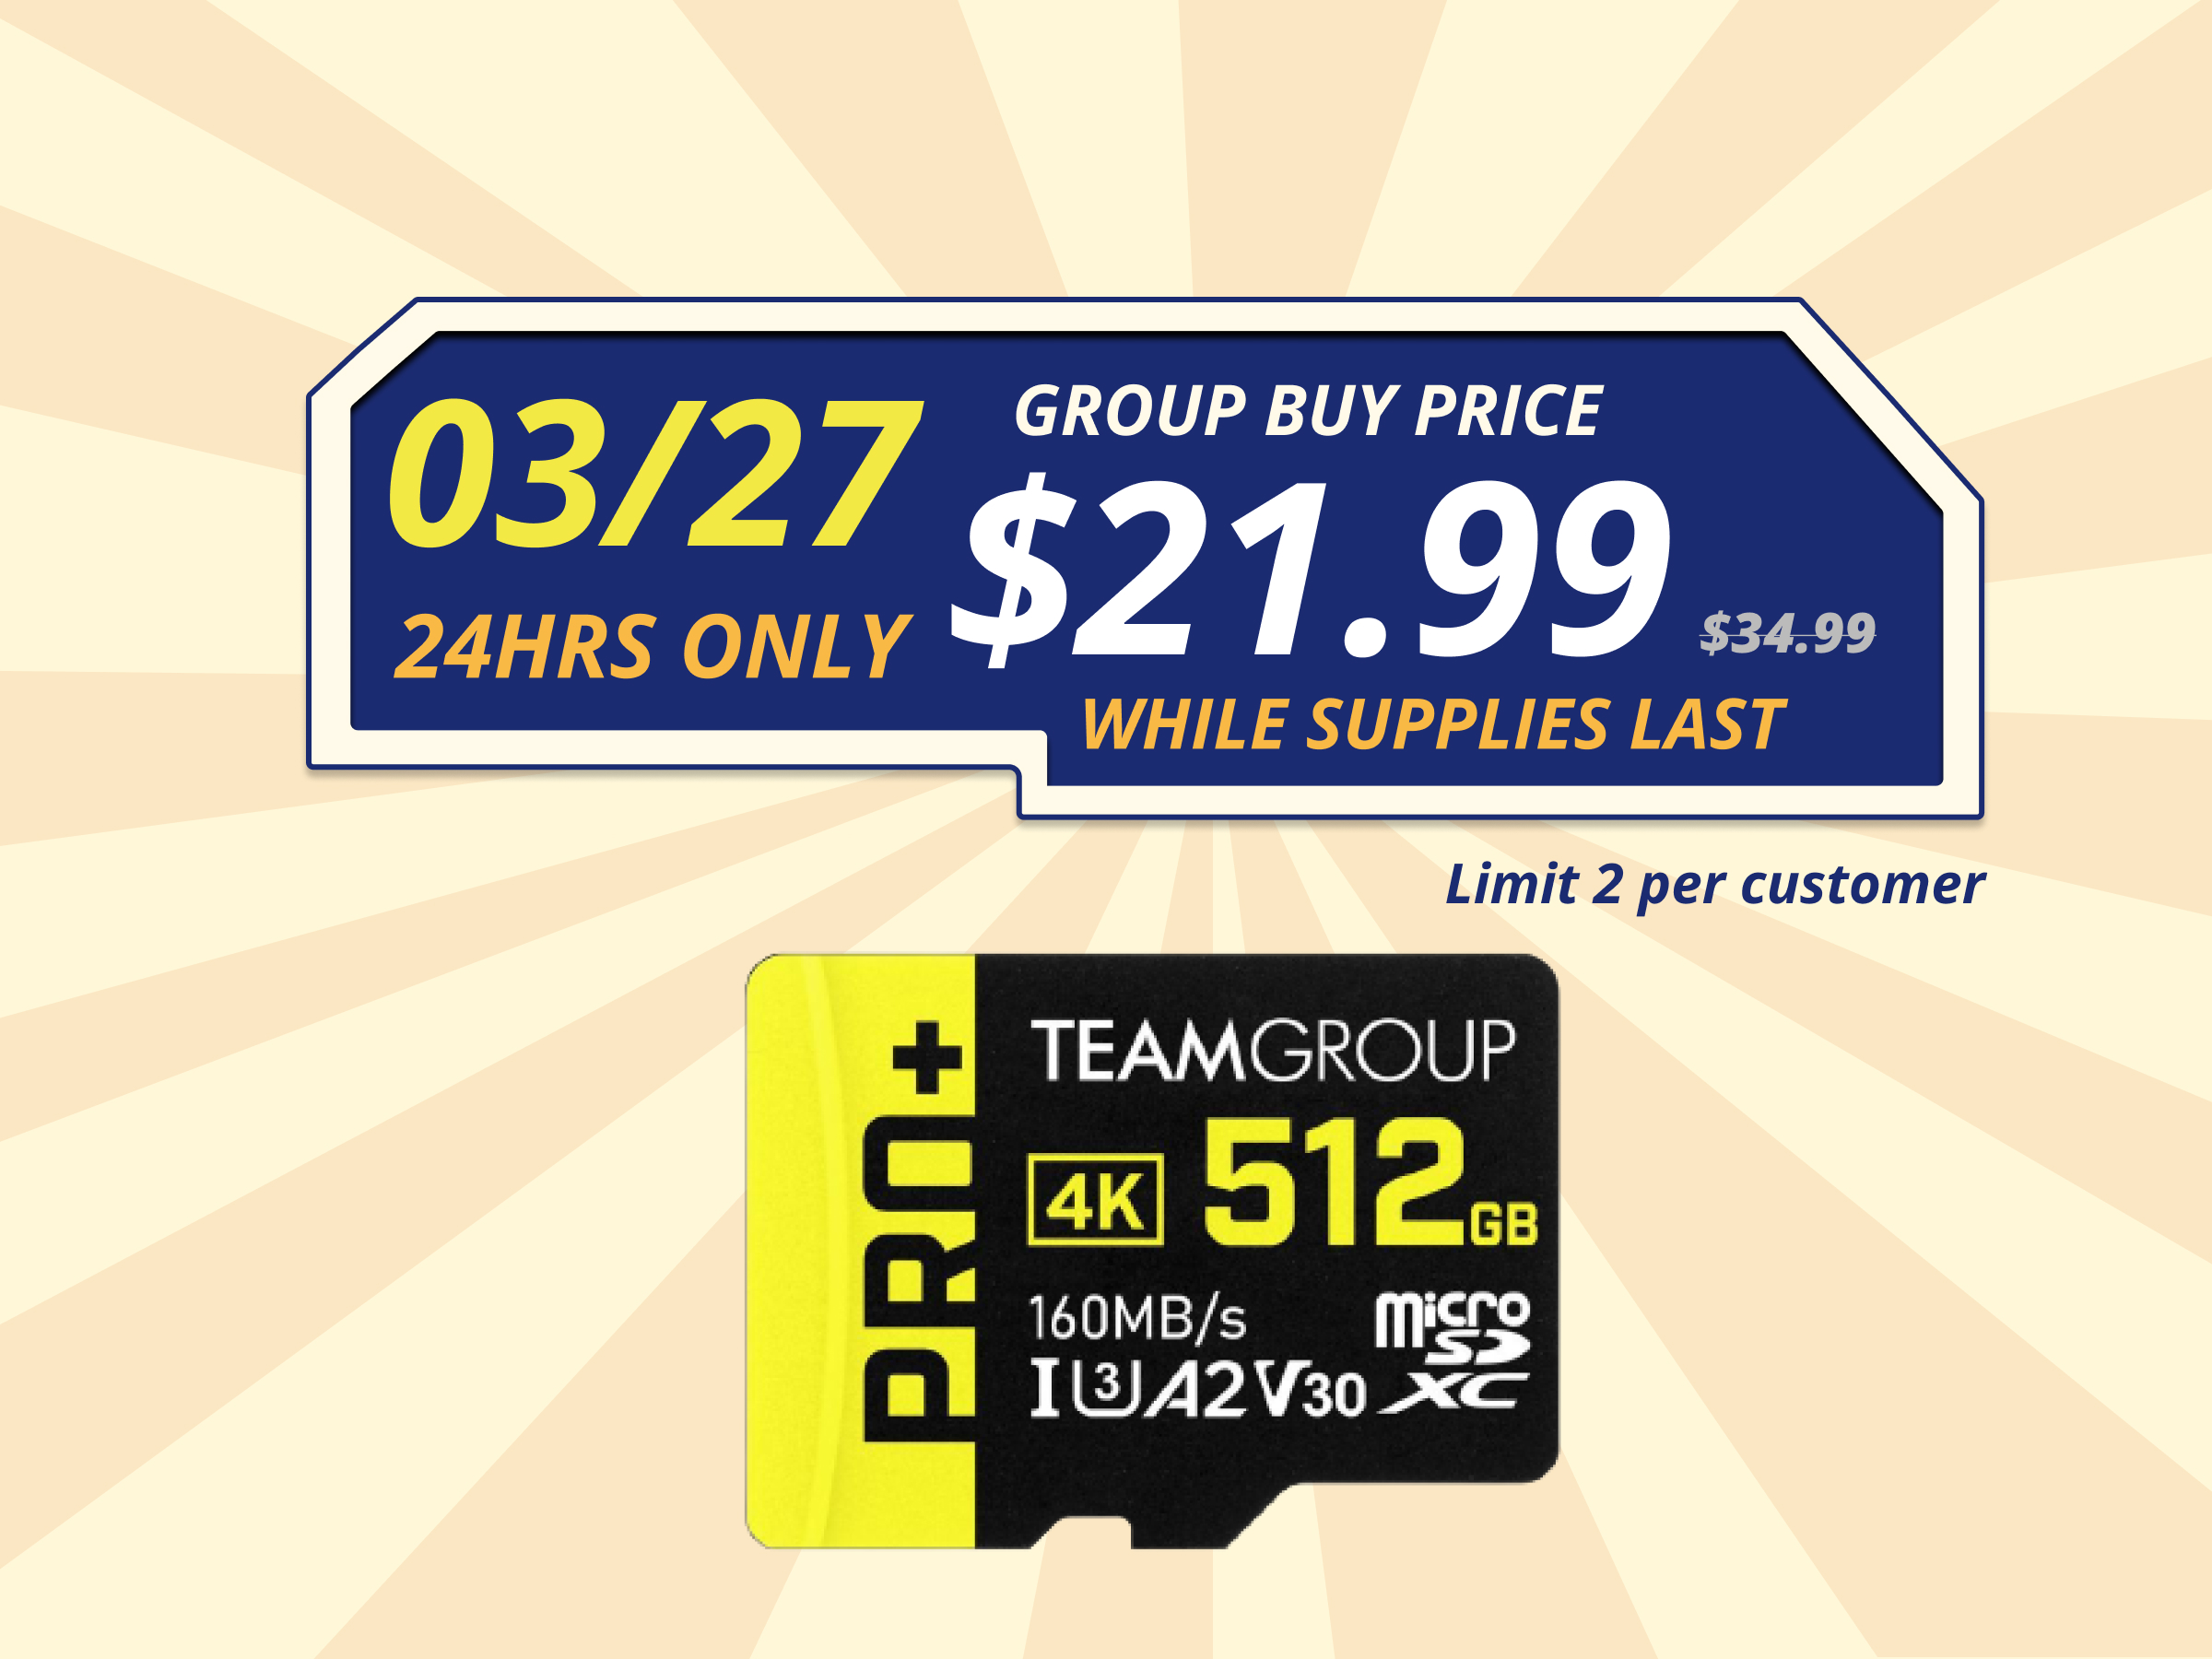 [microSD] Team 512GB Pro+ microSDHC UHS-I/U3 Class 10 Memory Card with Adapter, compatible with Switch, Speed Up to 160MB/s (TPPMSDX512GIA2V3003)- $21.99 (group buy)